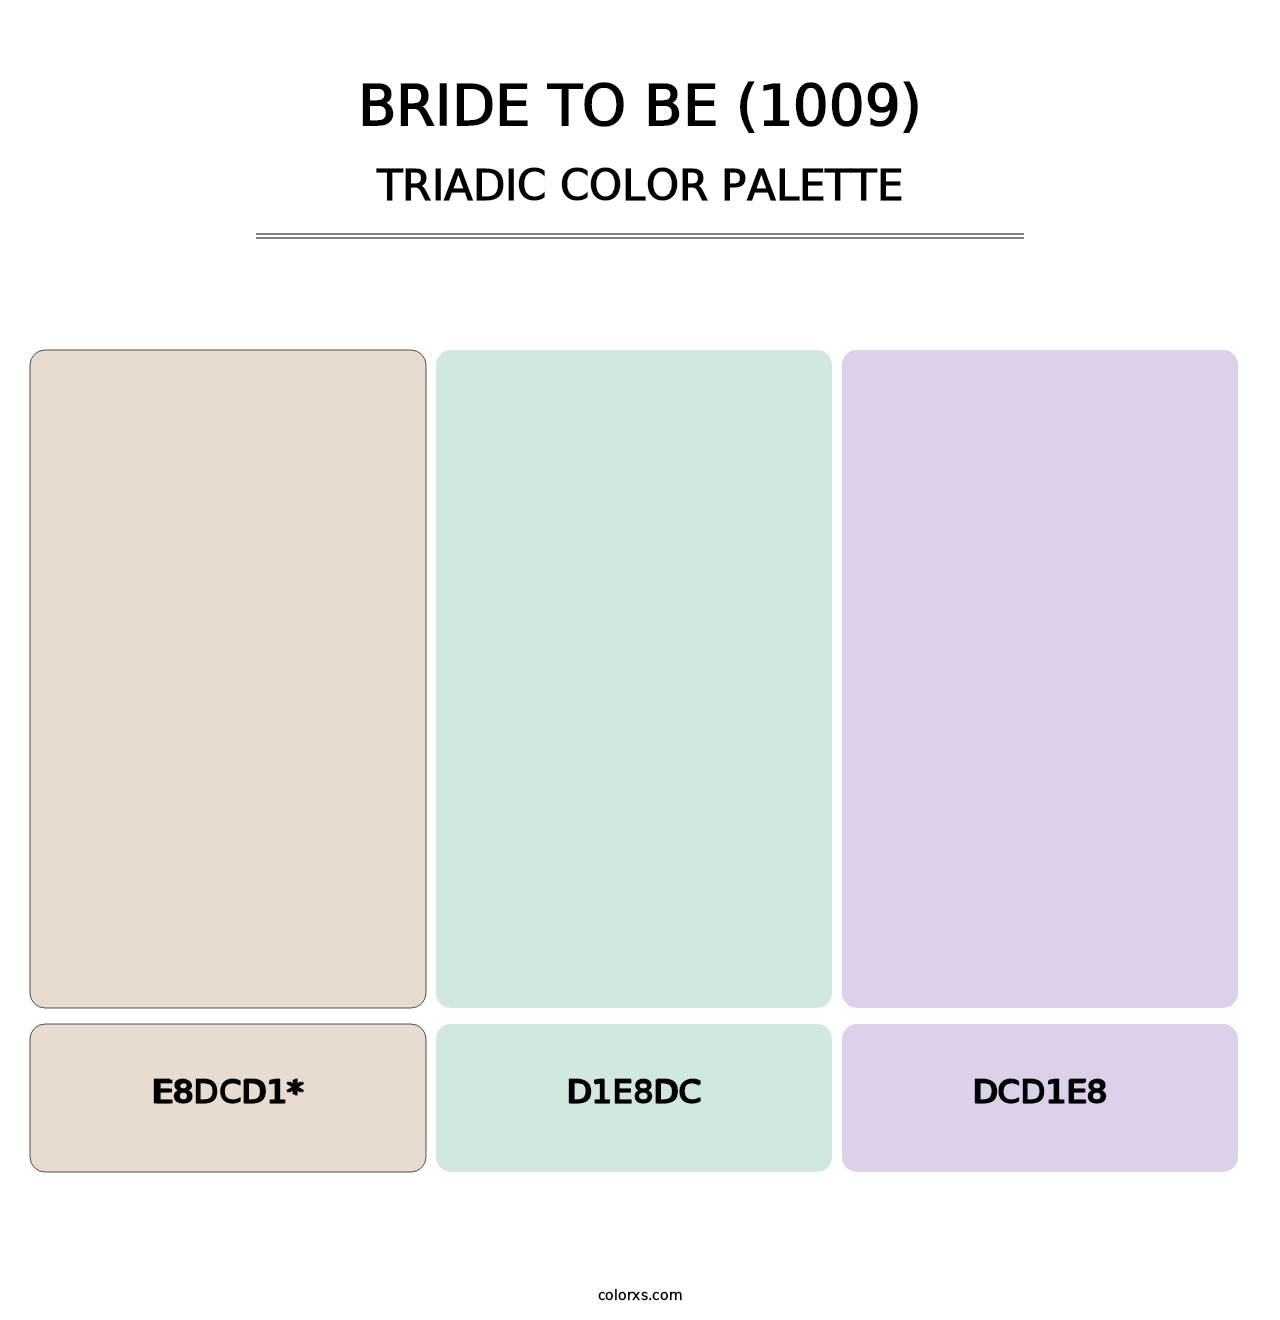 Bride To Be (1009) - Triadic Color Palette